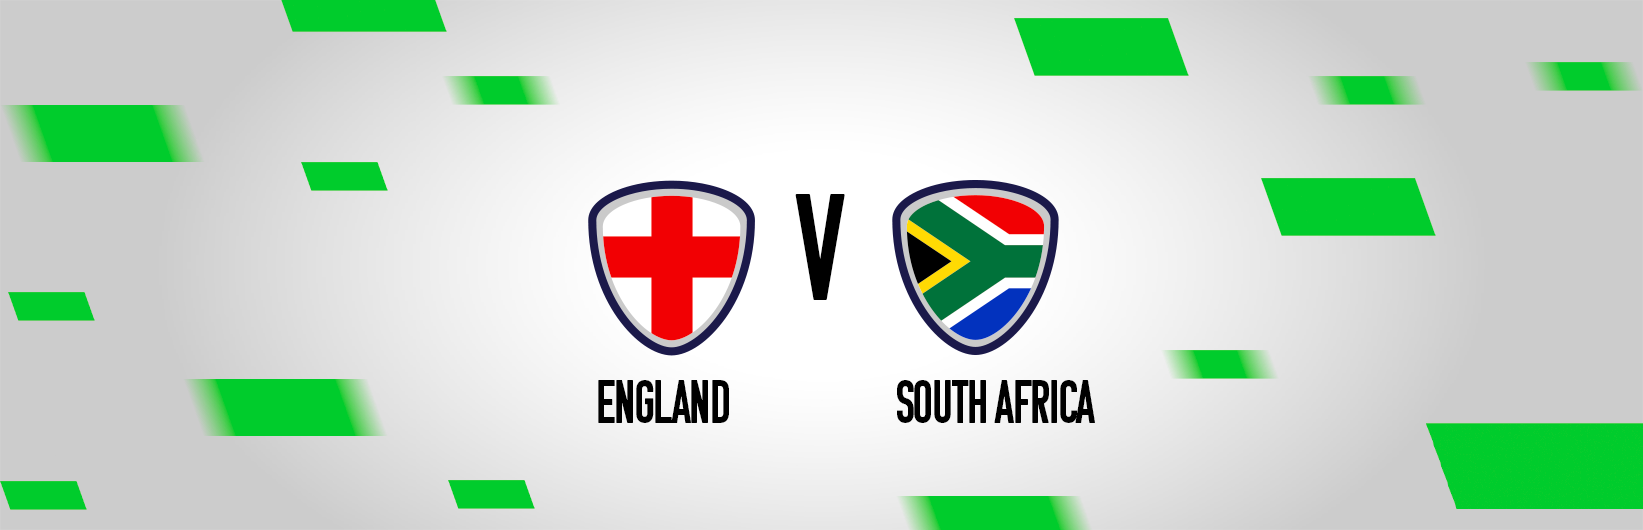 Rugby World Cup tips: Best bets for England v South Africa